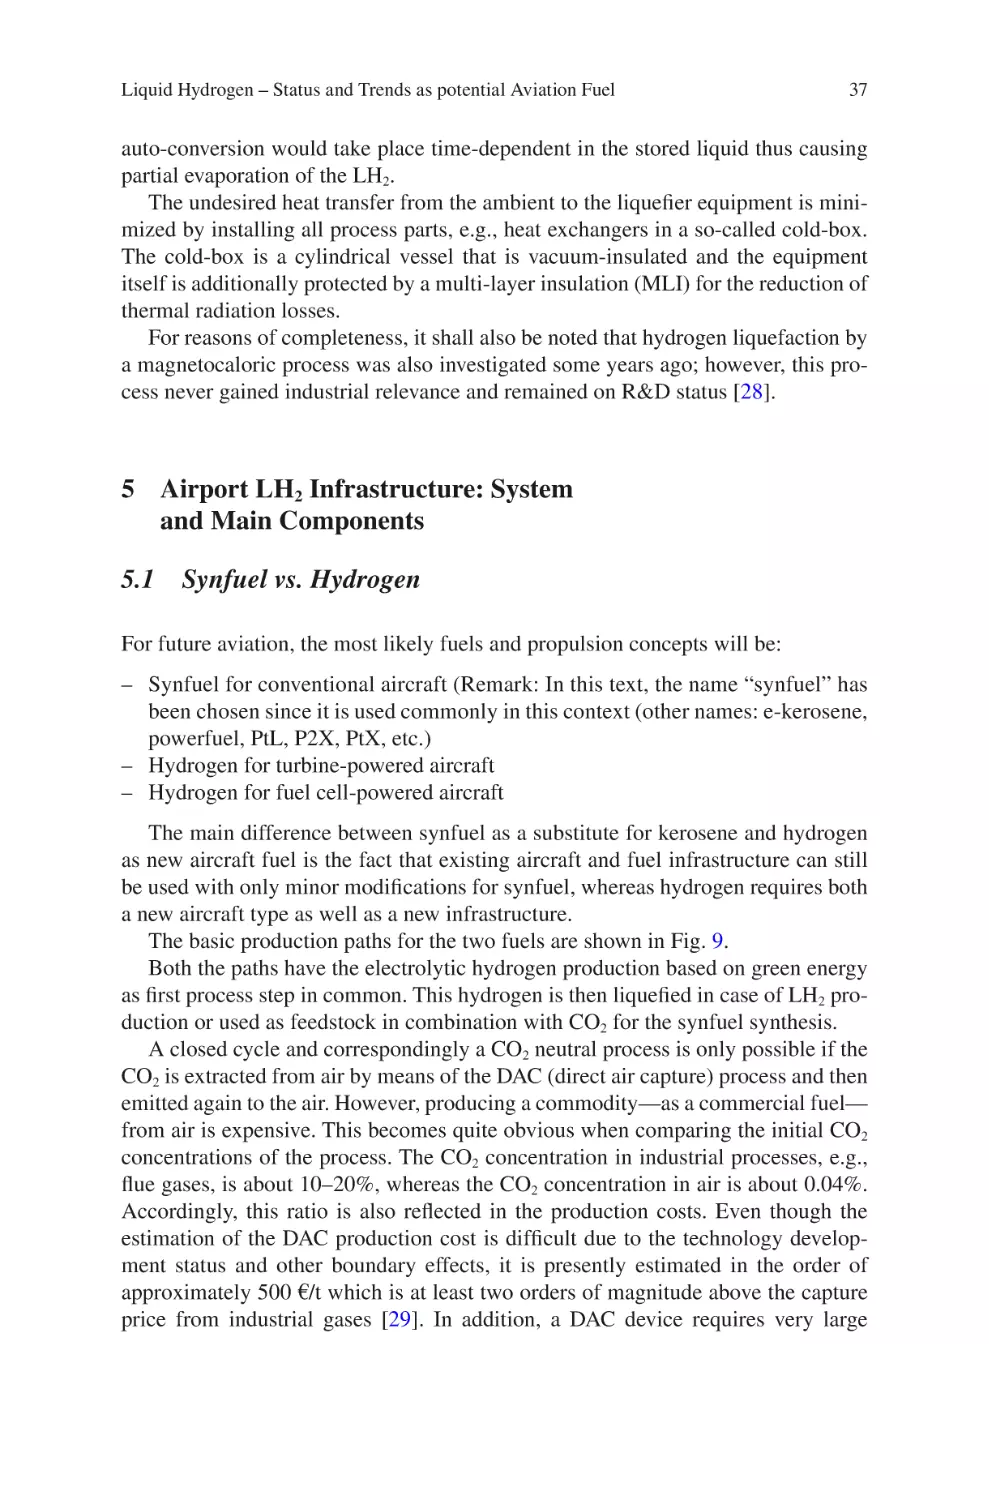 5 Airport LH2 Infrastructure
5.1 Synfuel vs. Hydrogen